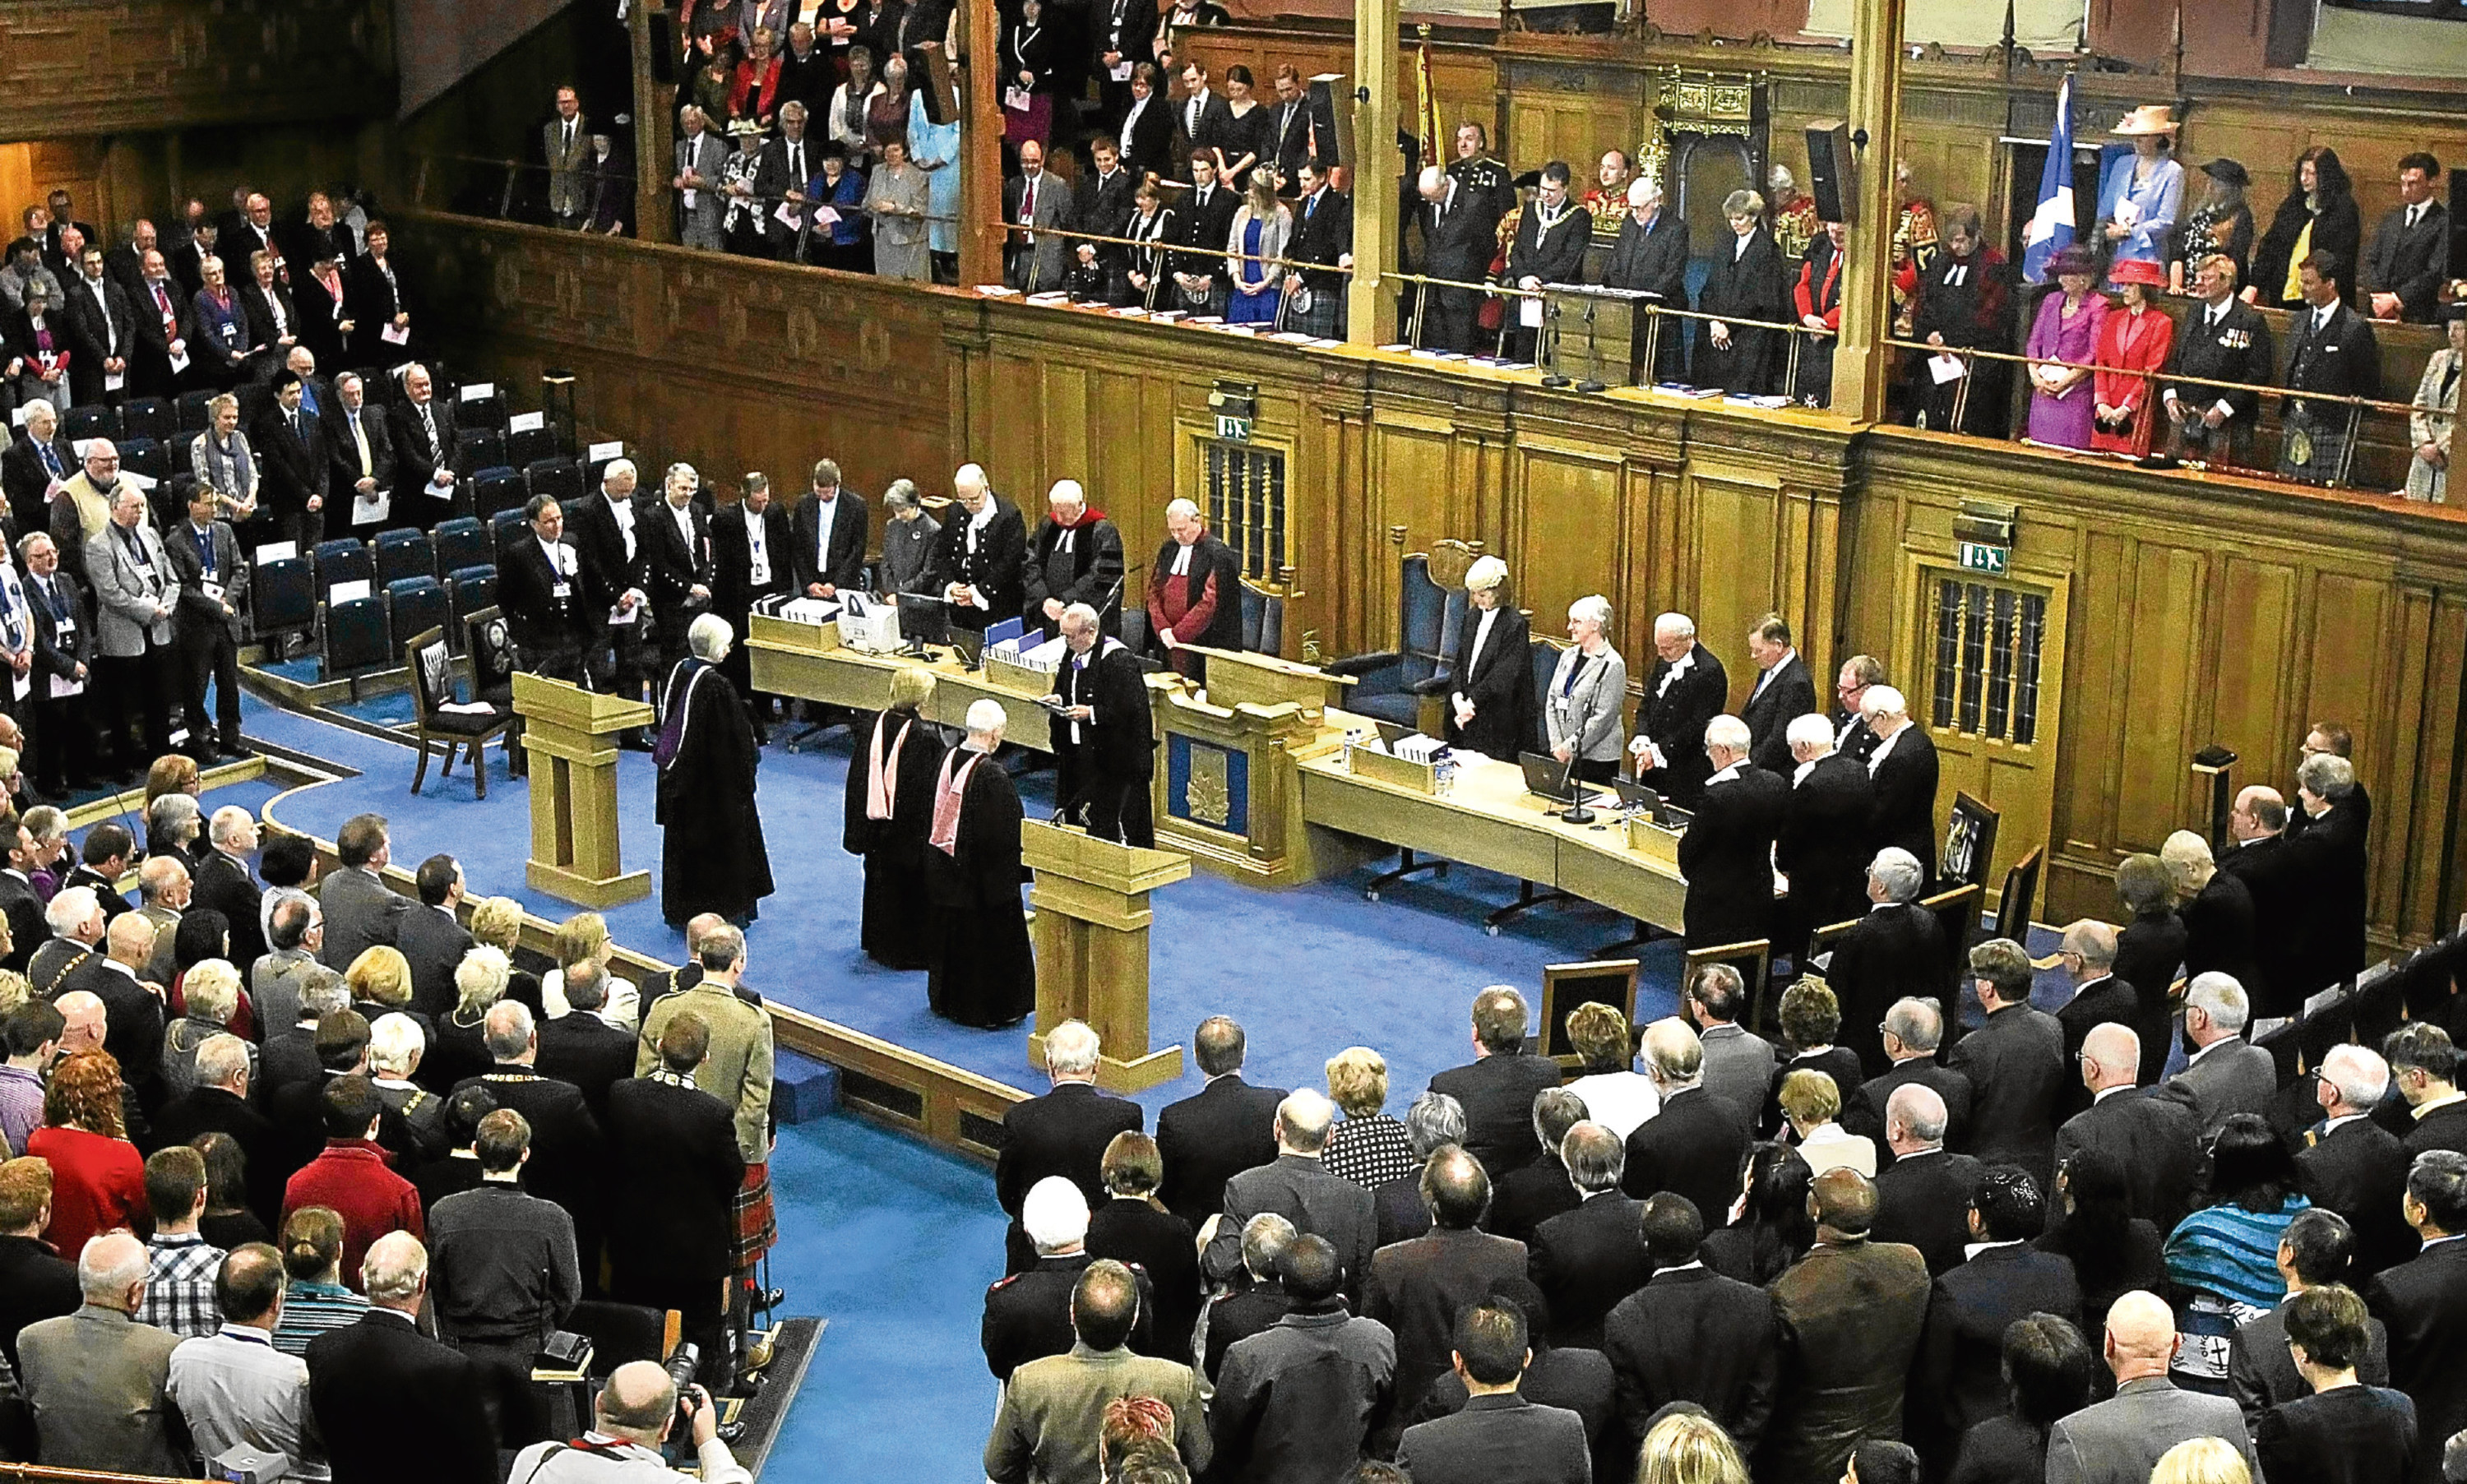 The General Assembly of the Church of Scotland in session.